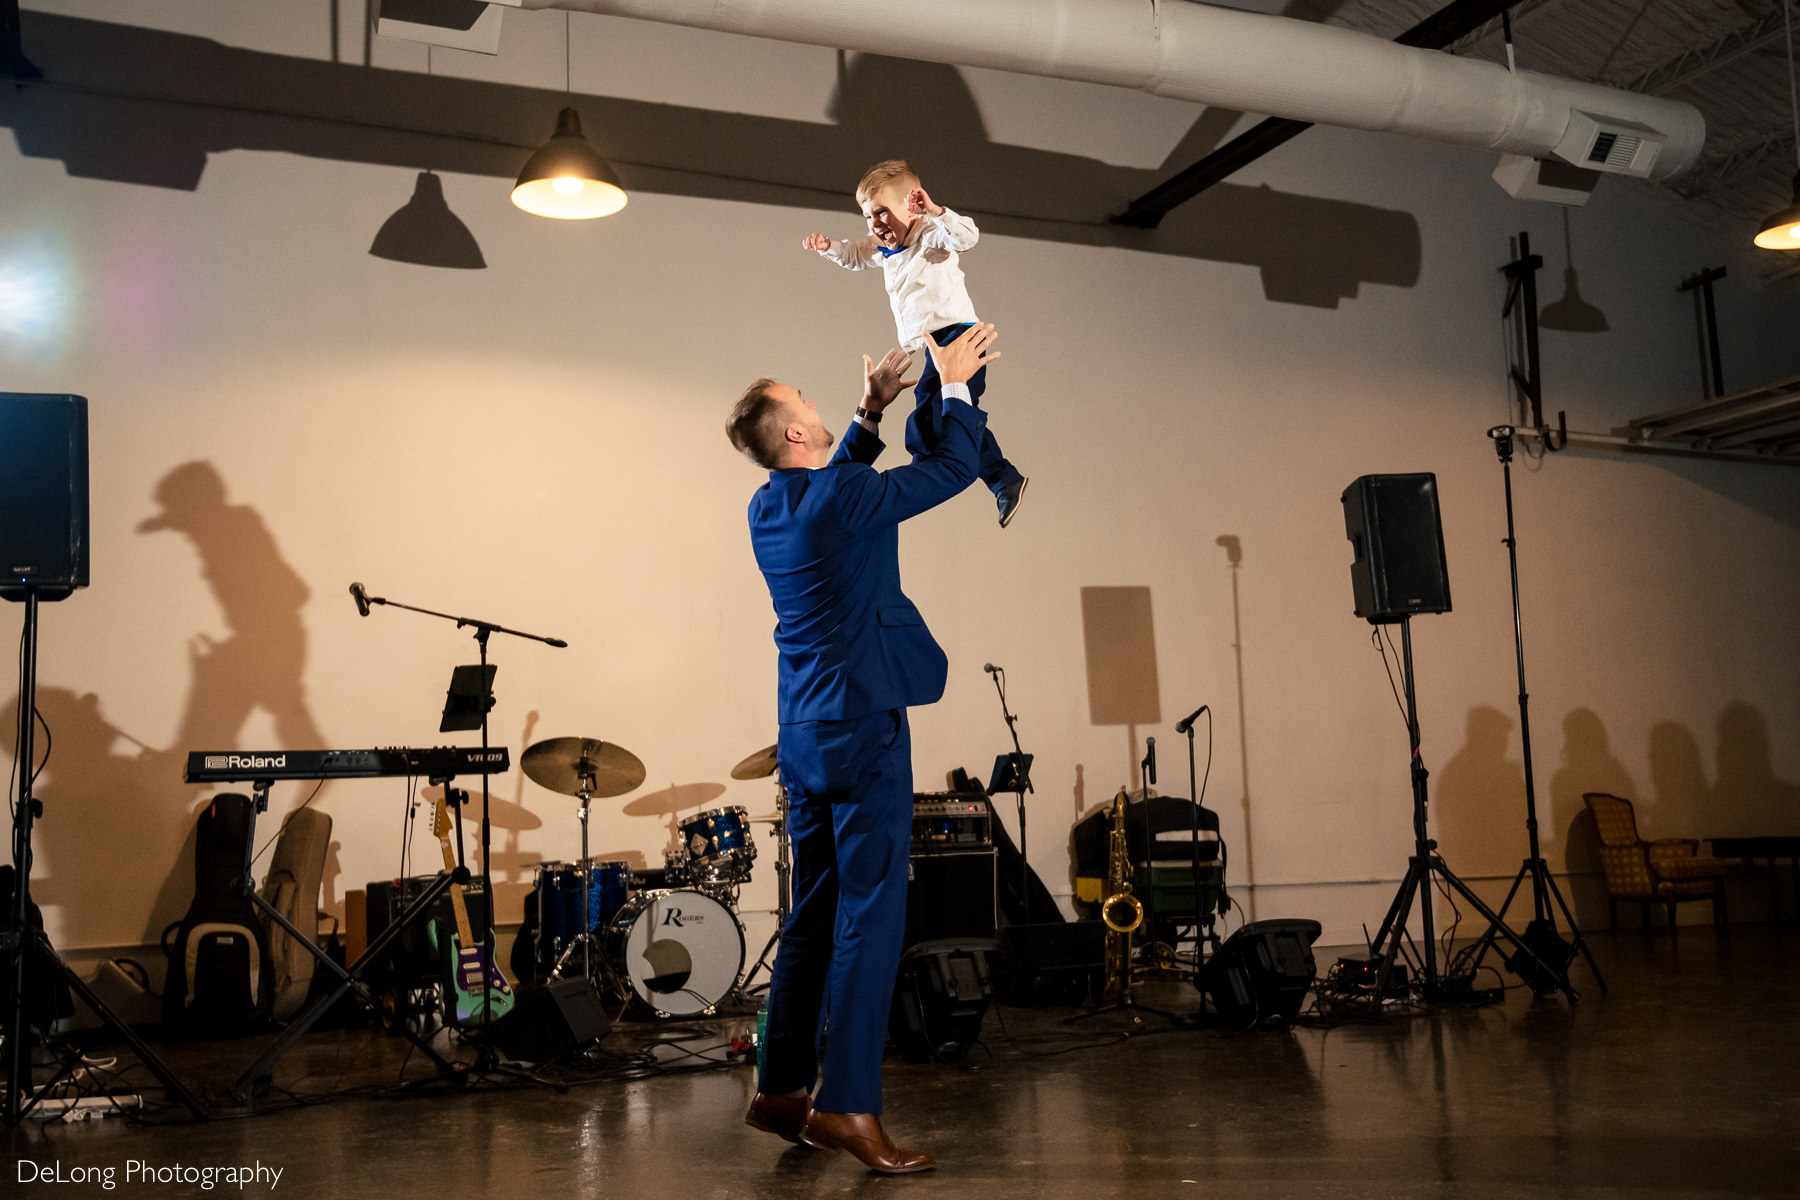 Photograph of a child laughing mid-air as he is being tossed upward during the reception at the Westside warehouse in Atlanta by Charlotte wedding photographers DeLong Photography